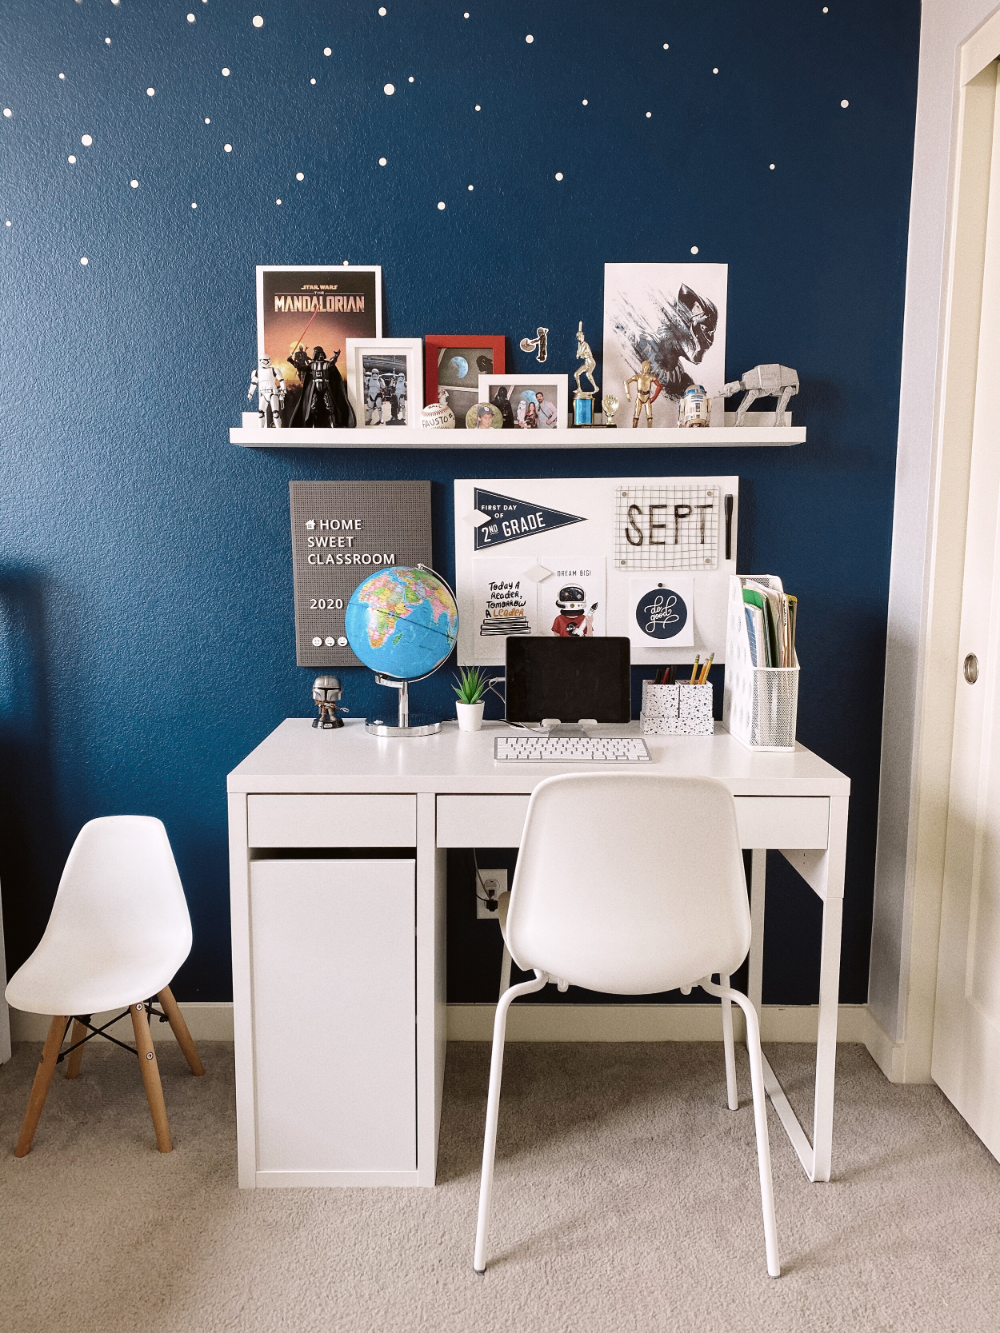 How to buy the right kids desk